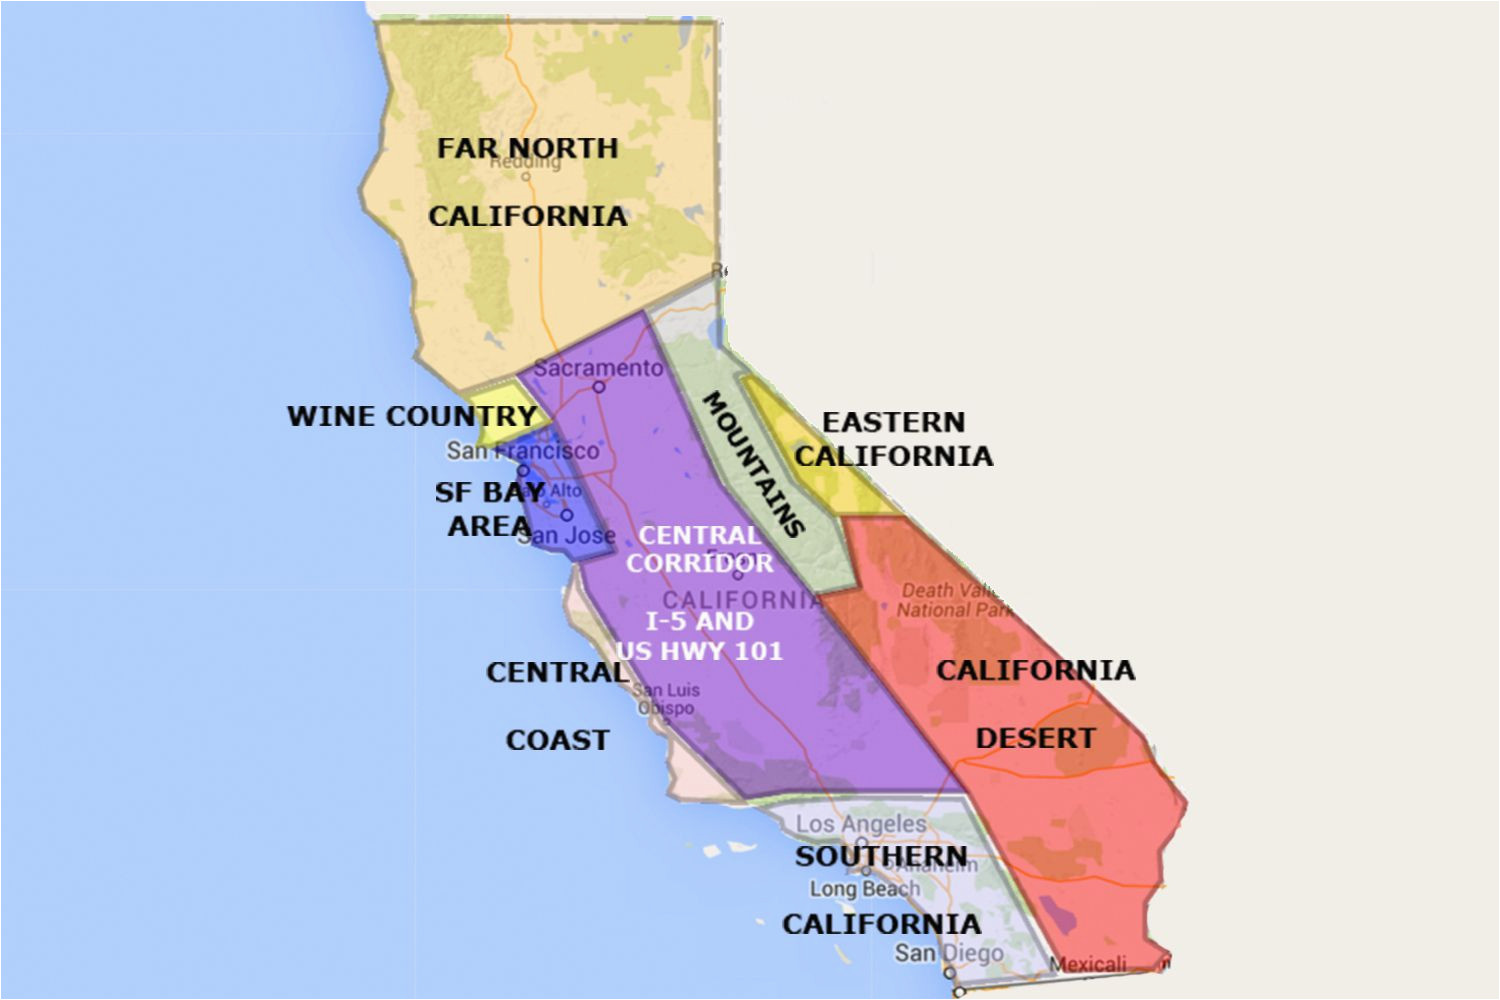 maps of california created for visitors and travelers